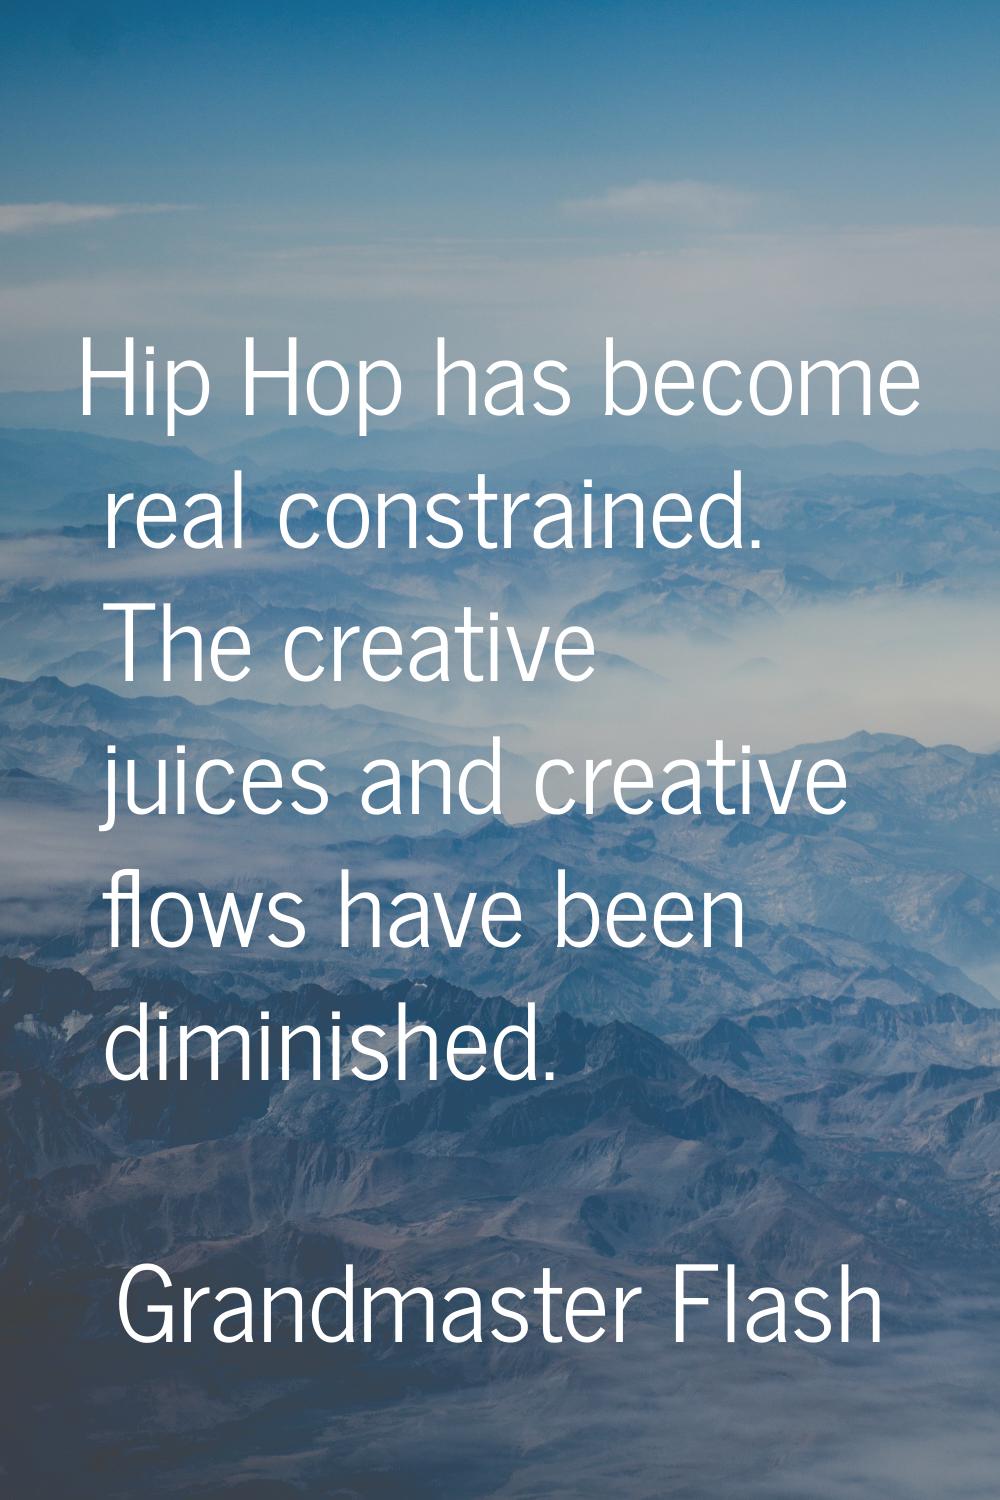 Hip Hop has become real constrained. The creative juices and creative flows have been diminished.